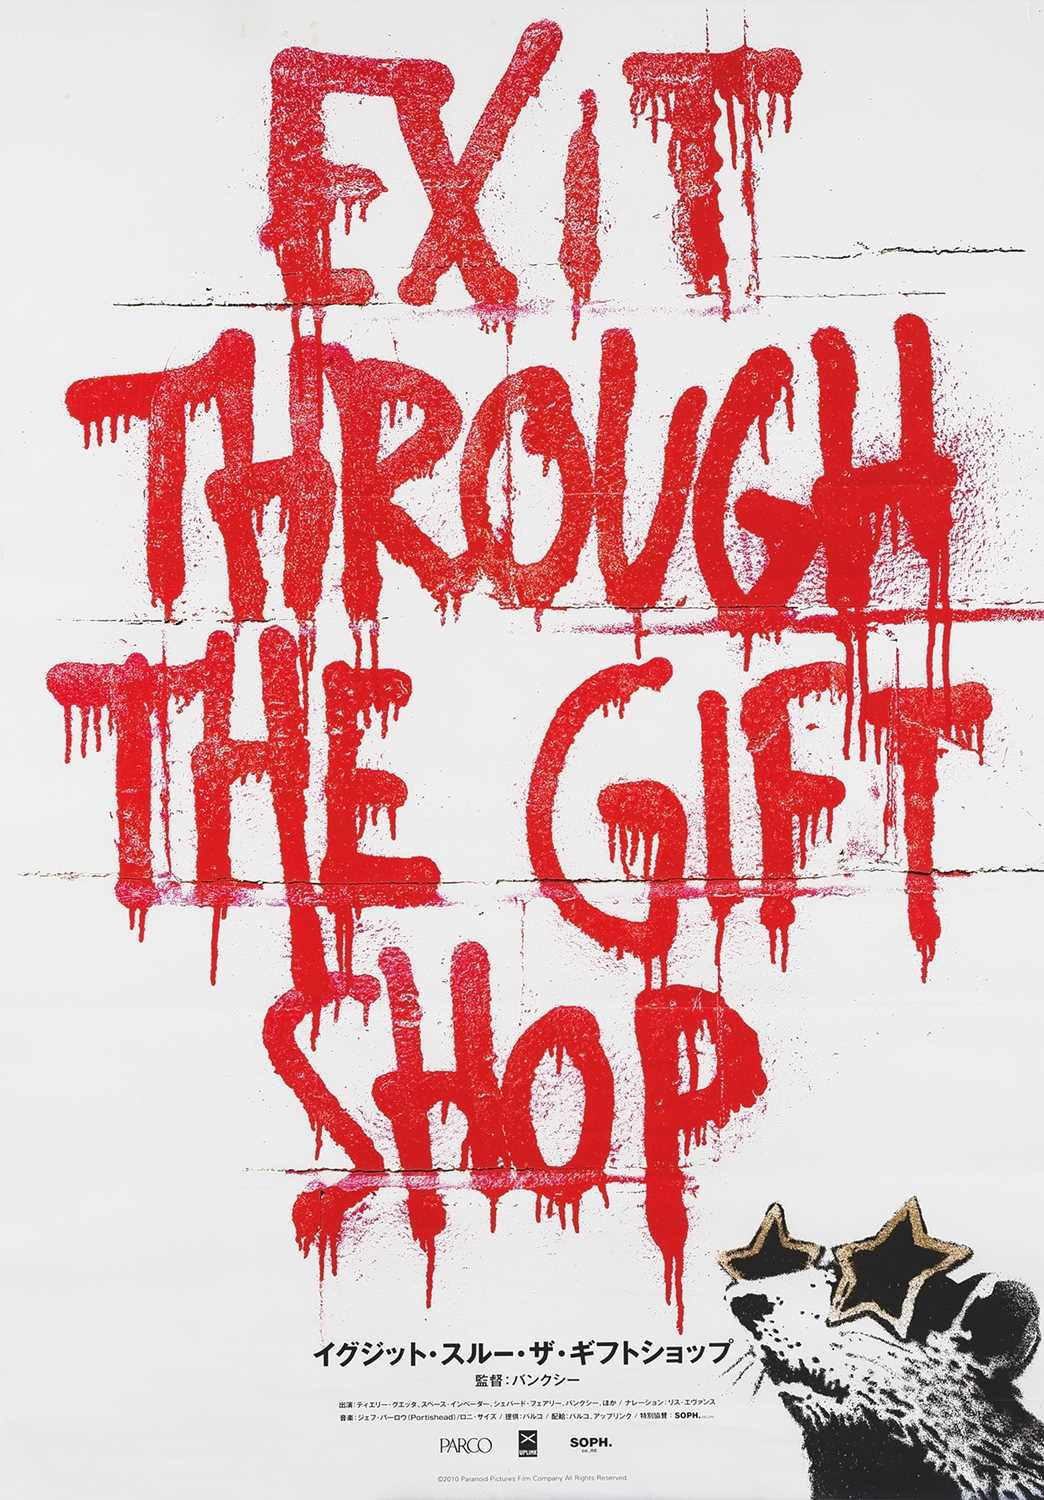 Lot 13 - Banksy (British 1974-), 'Exit Through The Gift Shop (Japanese)', 2011